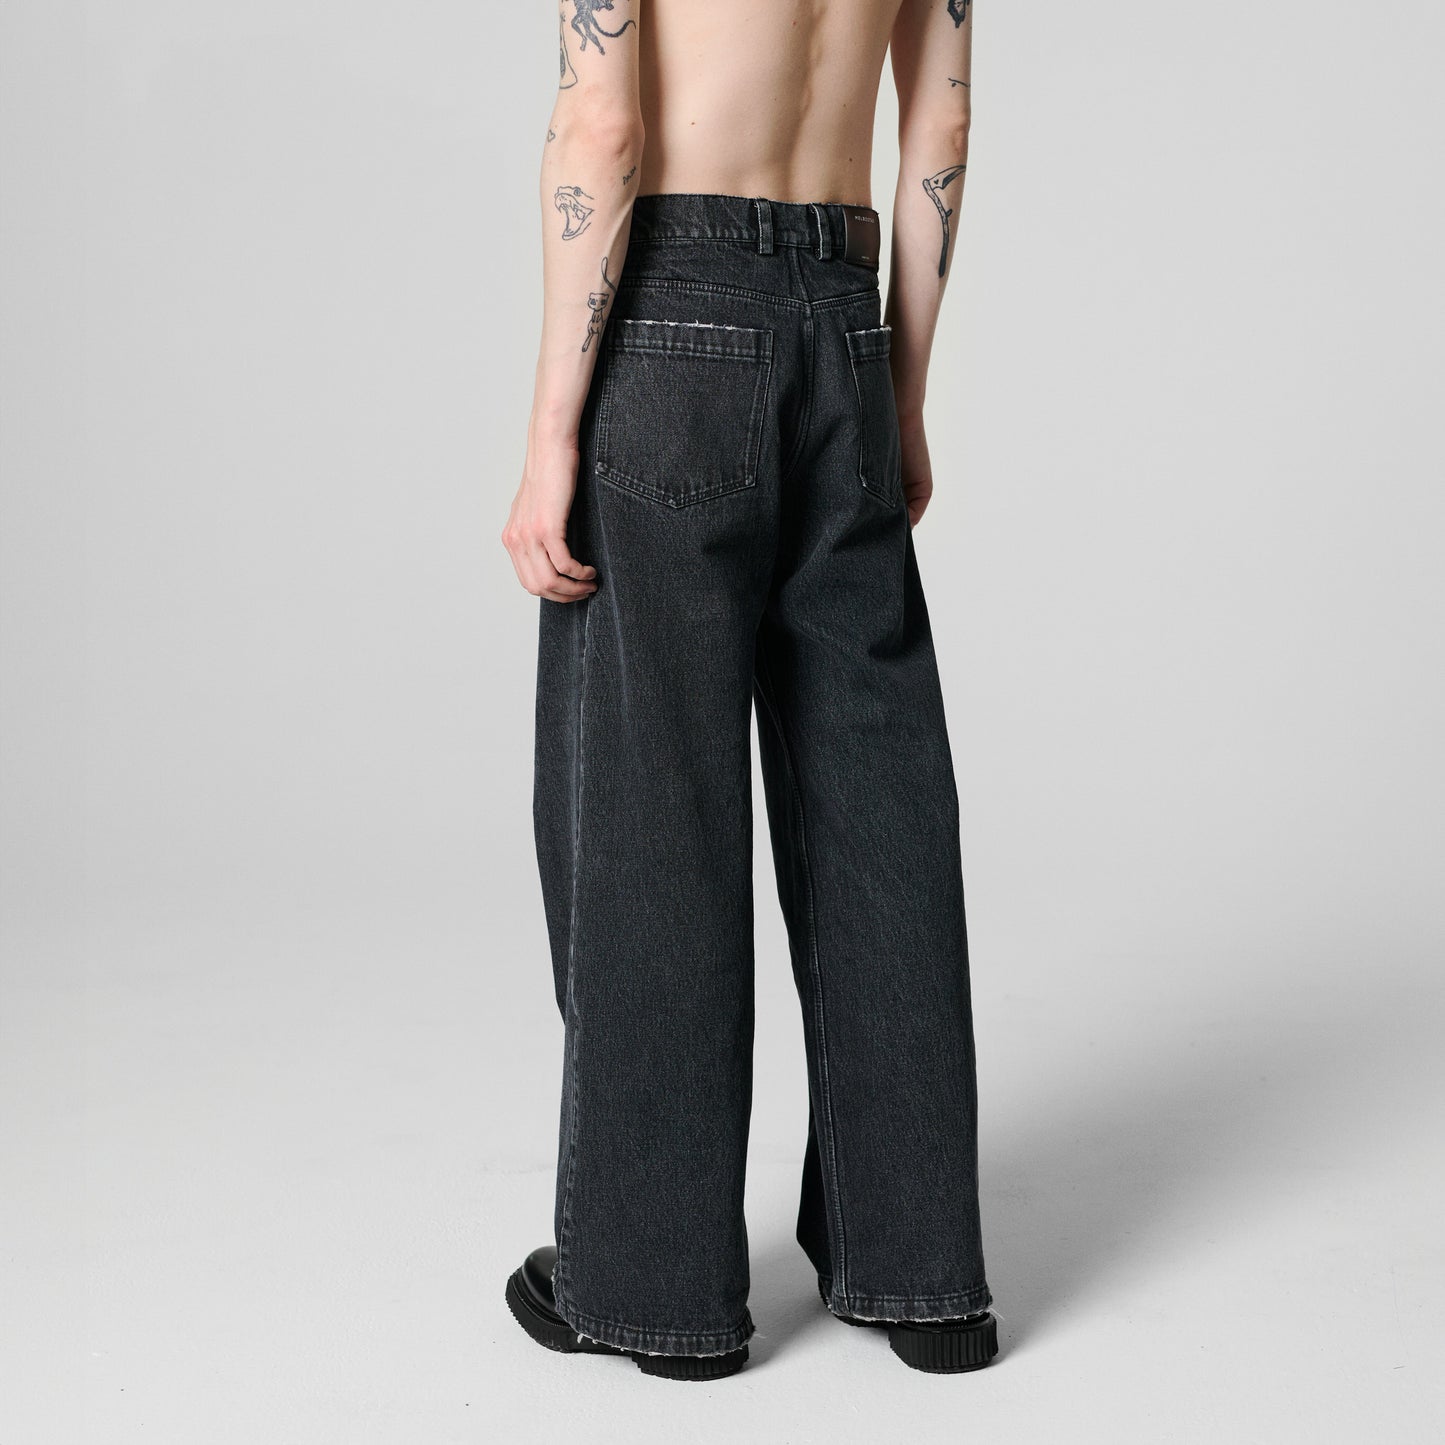 BLACK VINTAGE WASHED PLEATED SLOUCHY JEANS IN ORGANIC COTTON DENIM